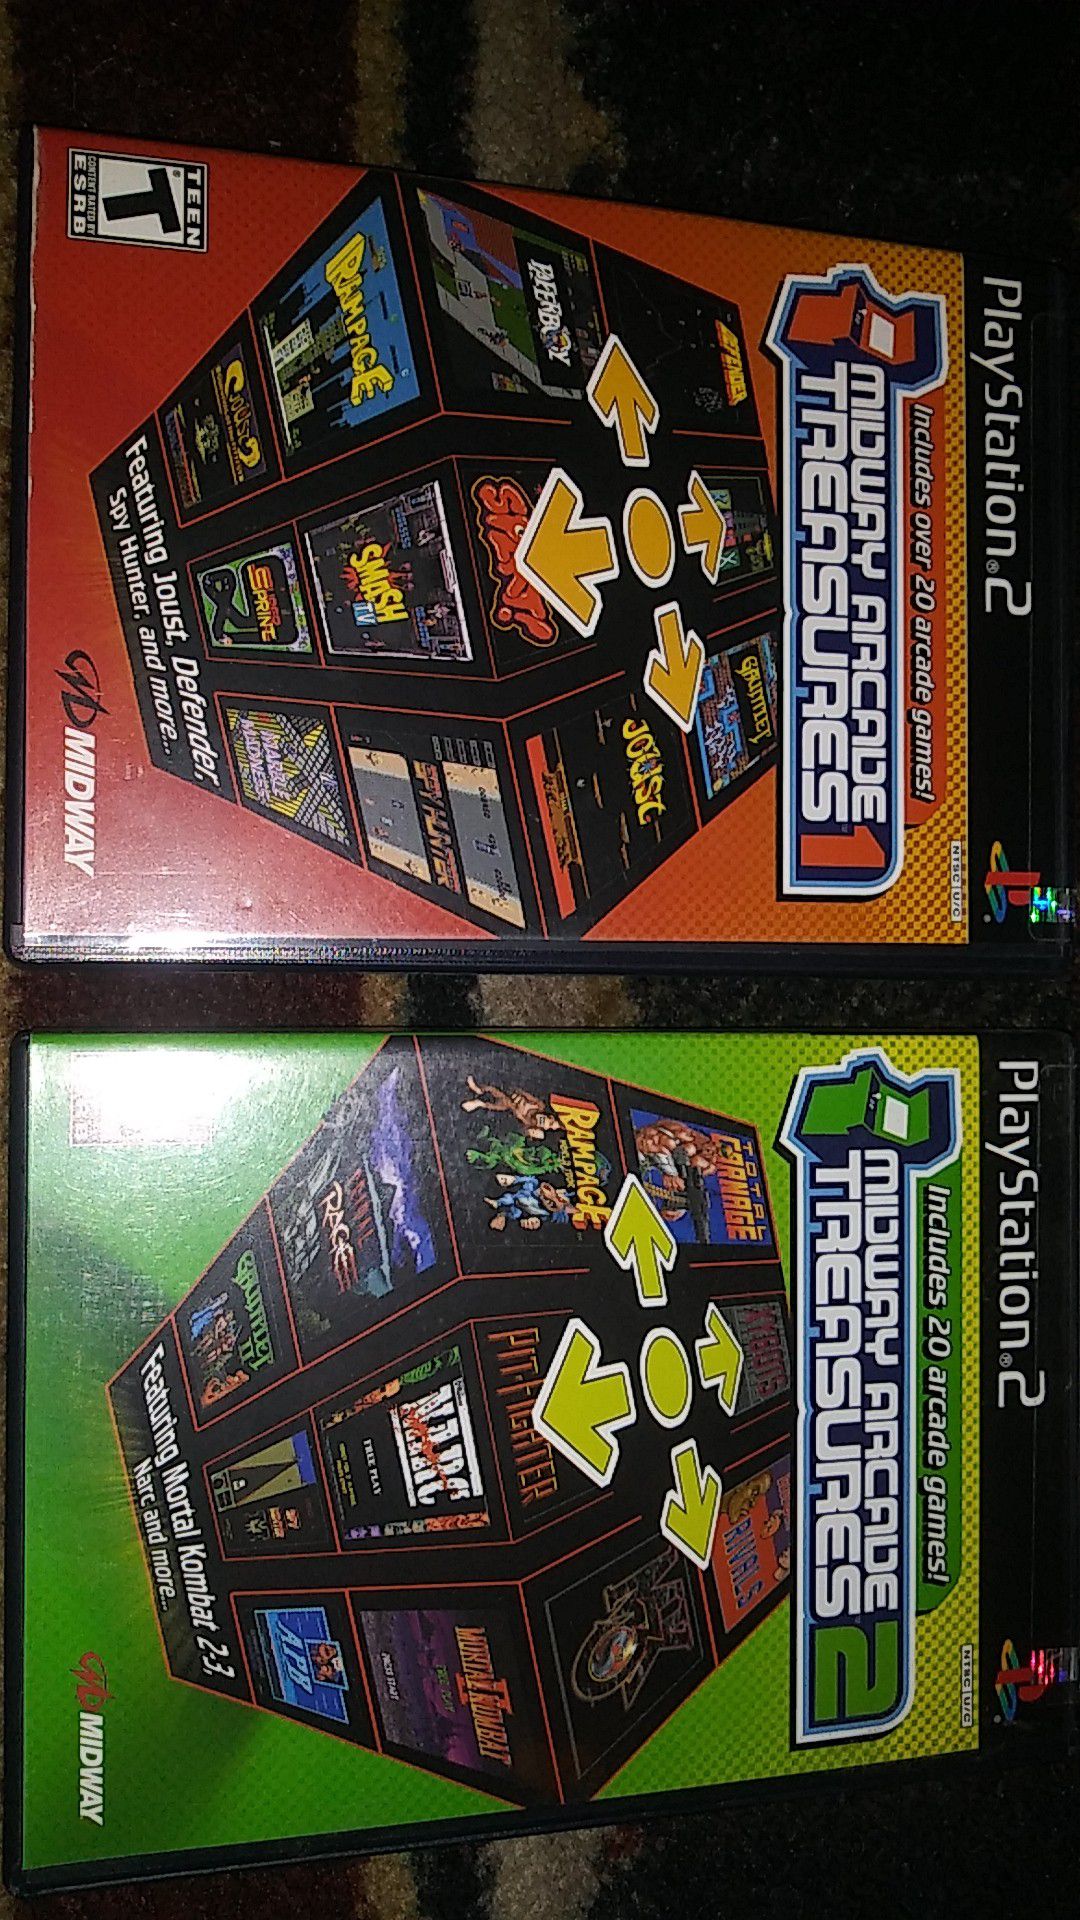 Midway Arcade Treasures 1 & 2 Sony PS2 video games